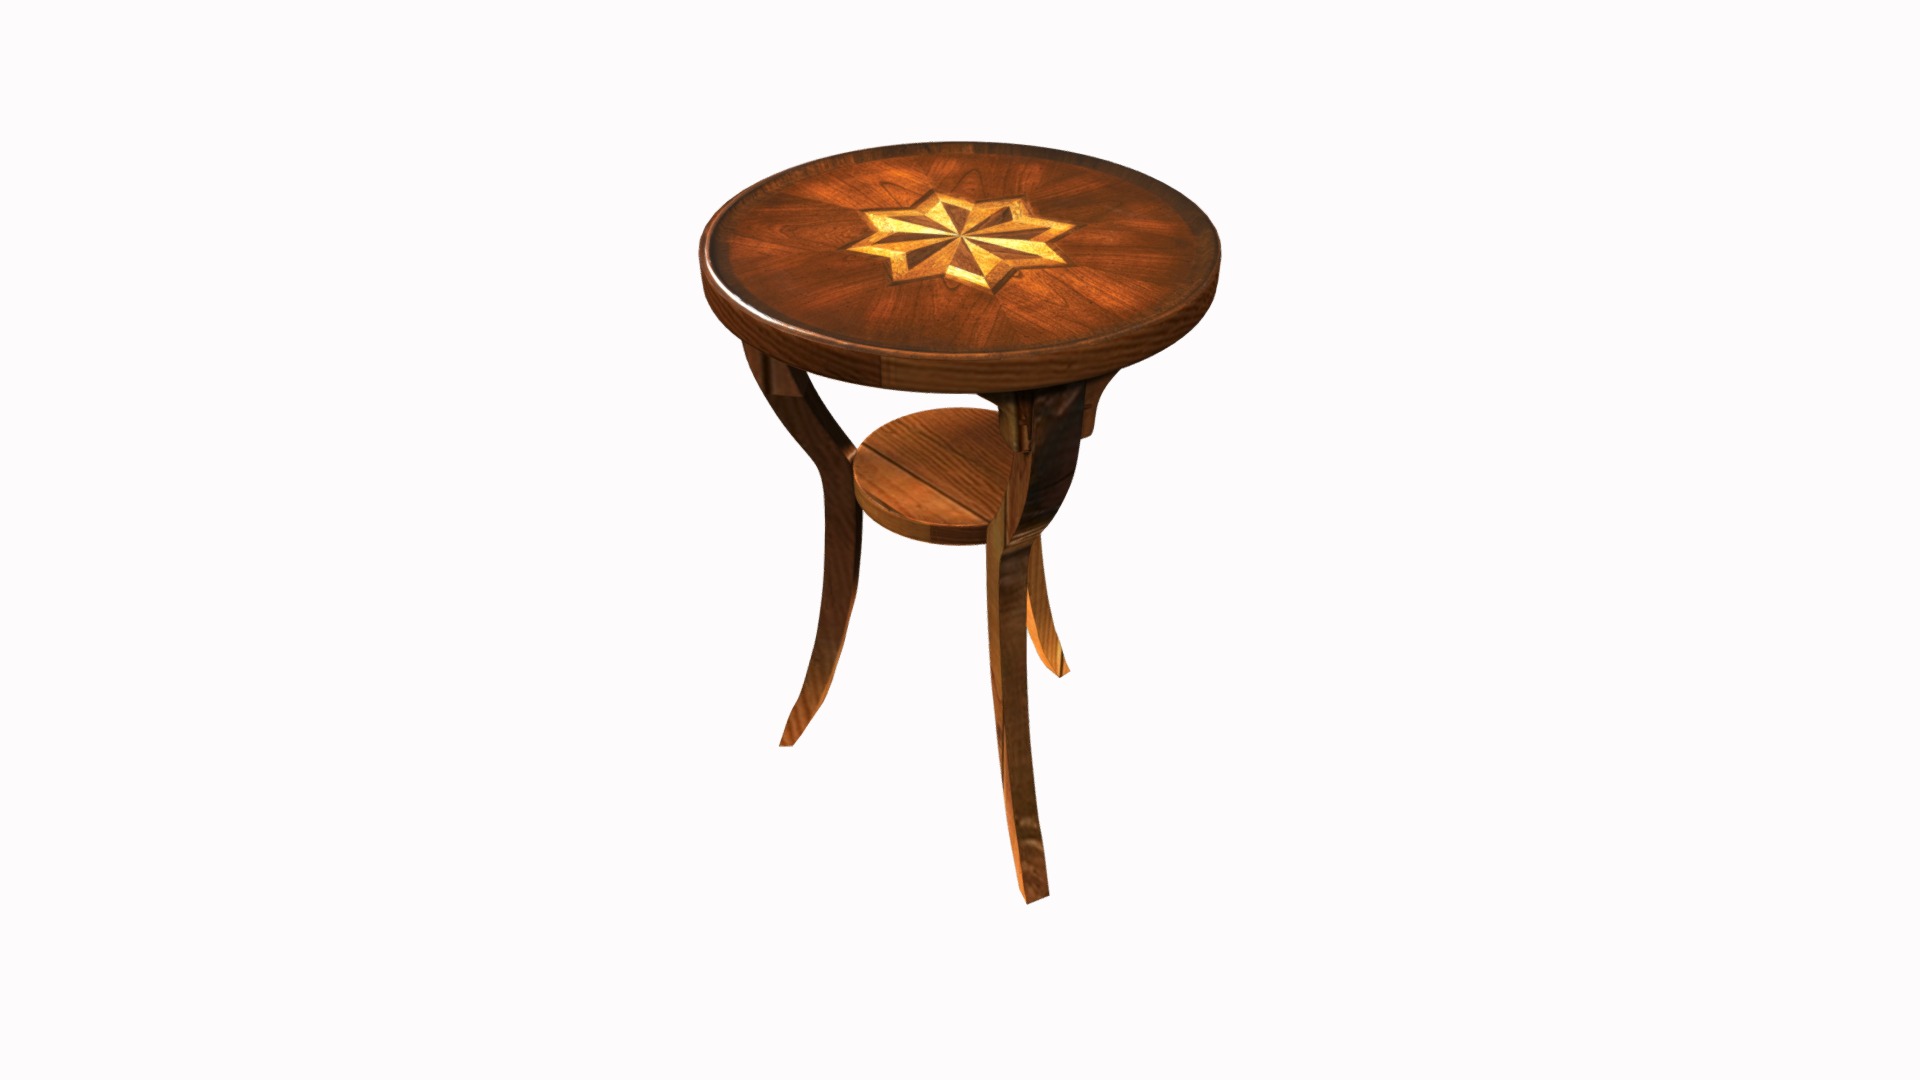 3D model Cherry Accent Table - This is a 3D model of the Cherry Accent Table. The 3D model is about a wooden table with a gold logo.